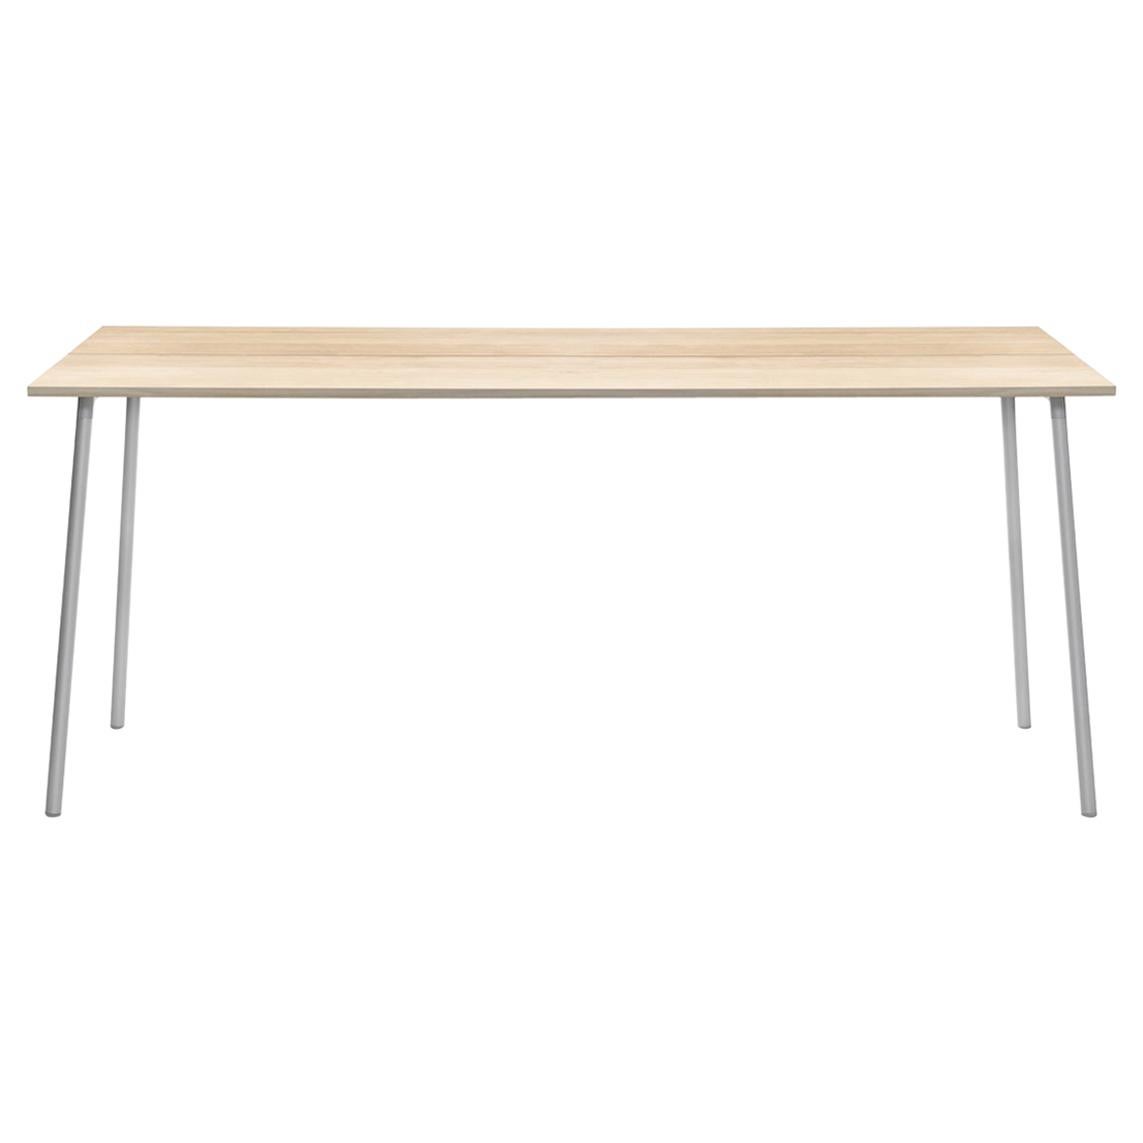 Emeco Run High Table in Accoya with Aluminum Frame by Sam Hecht and Kim Colin